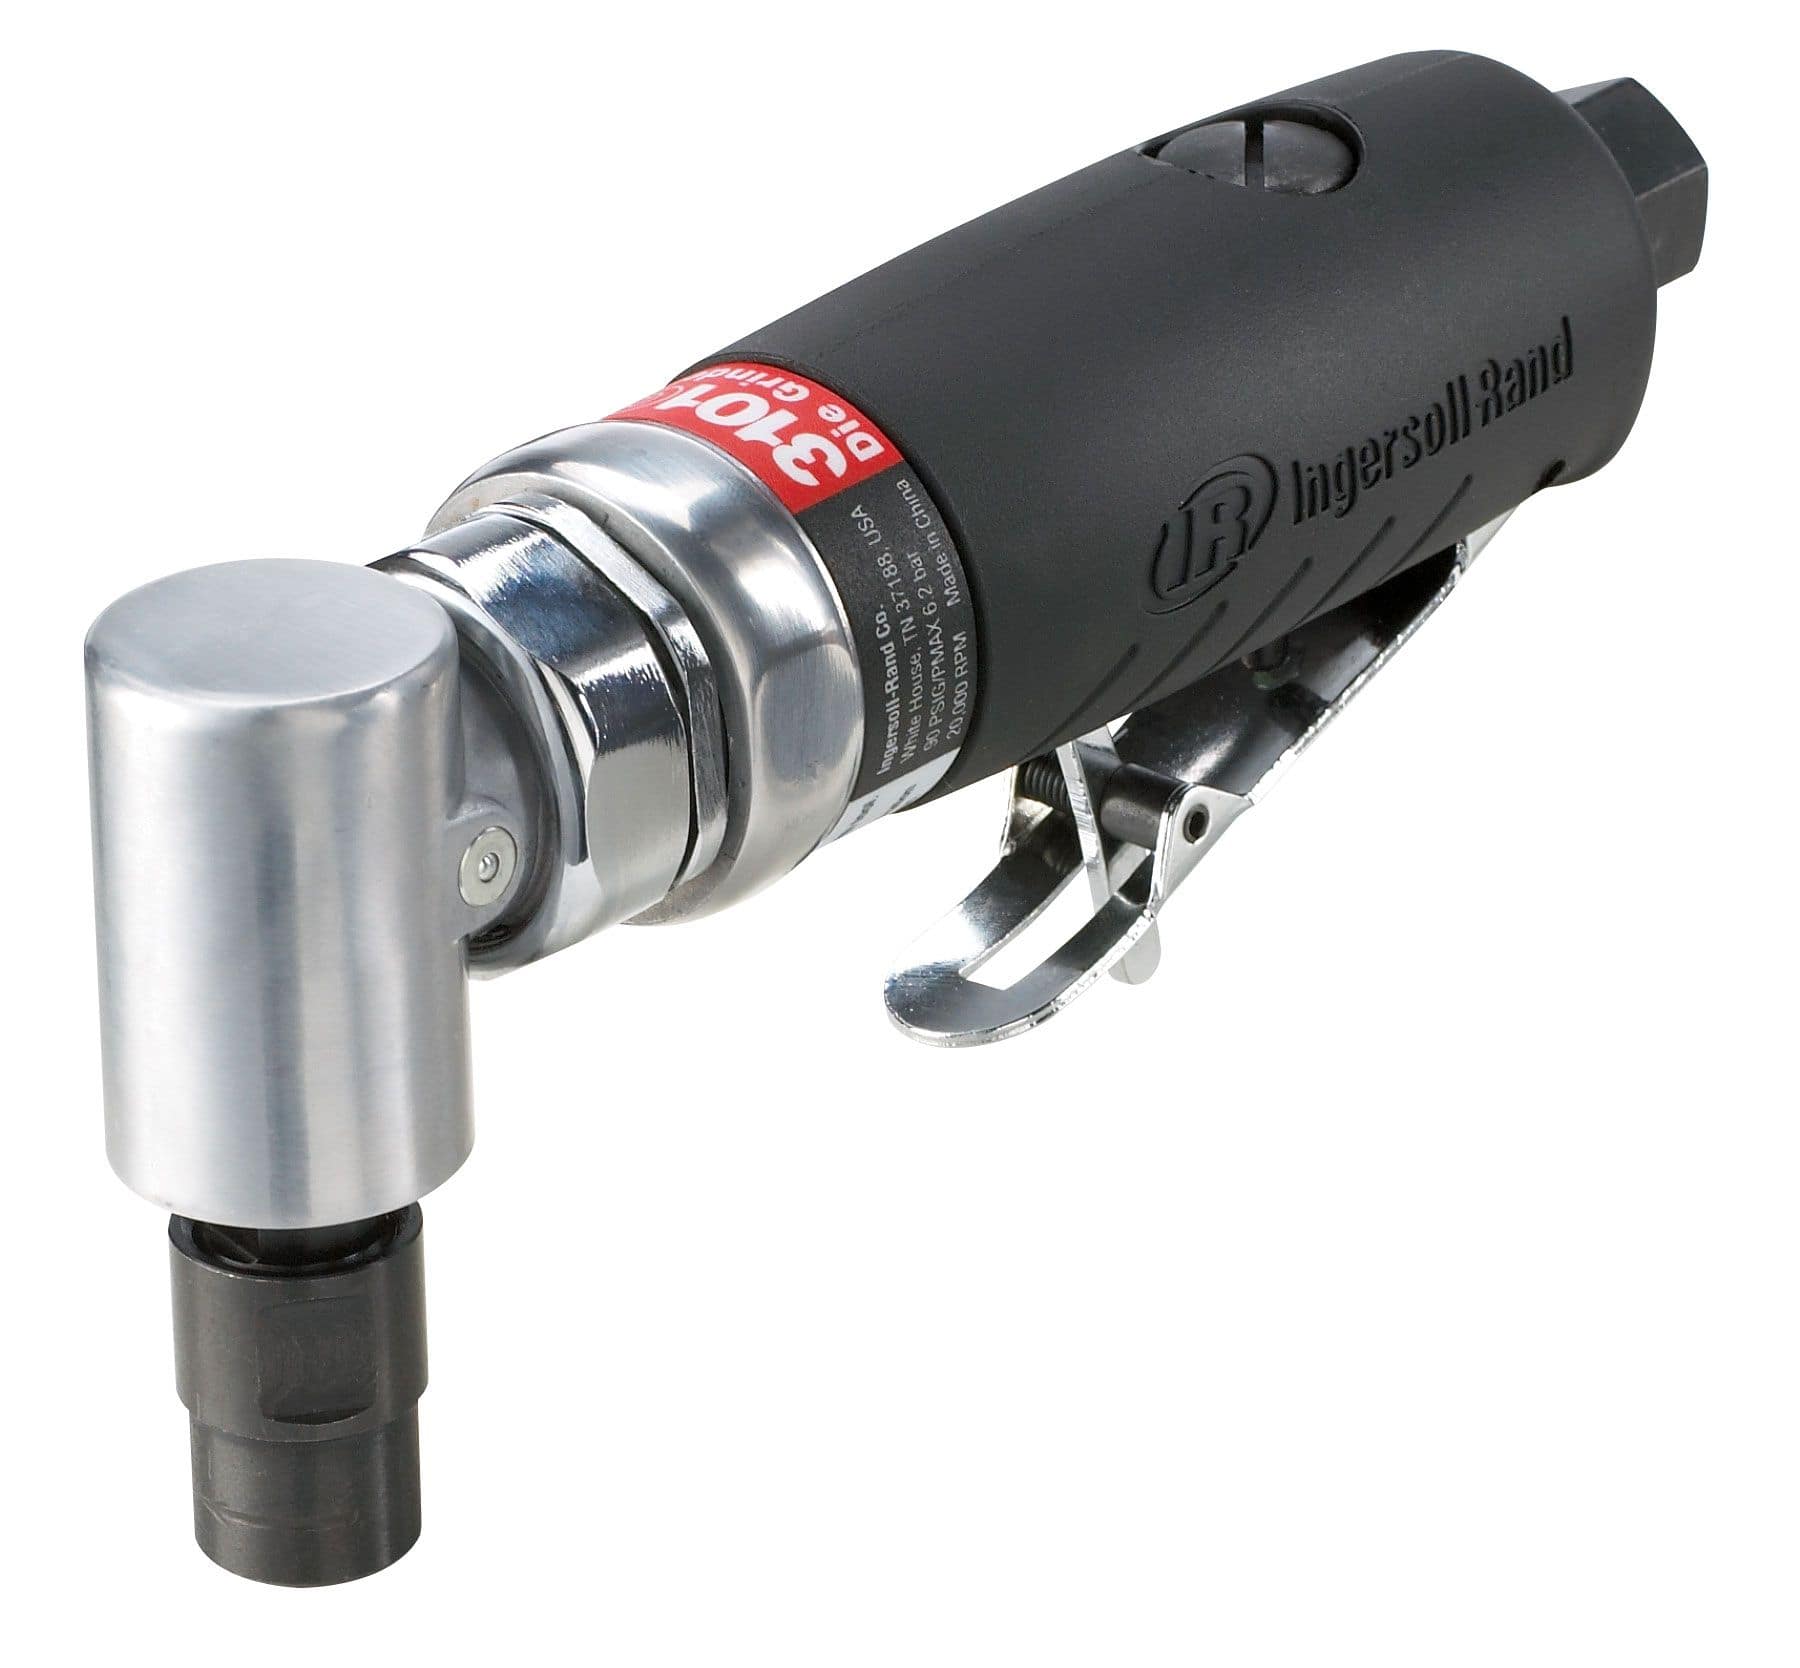 Ingersoll Rand Angle Die Air Grinder Canadian Tire